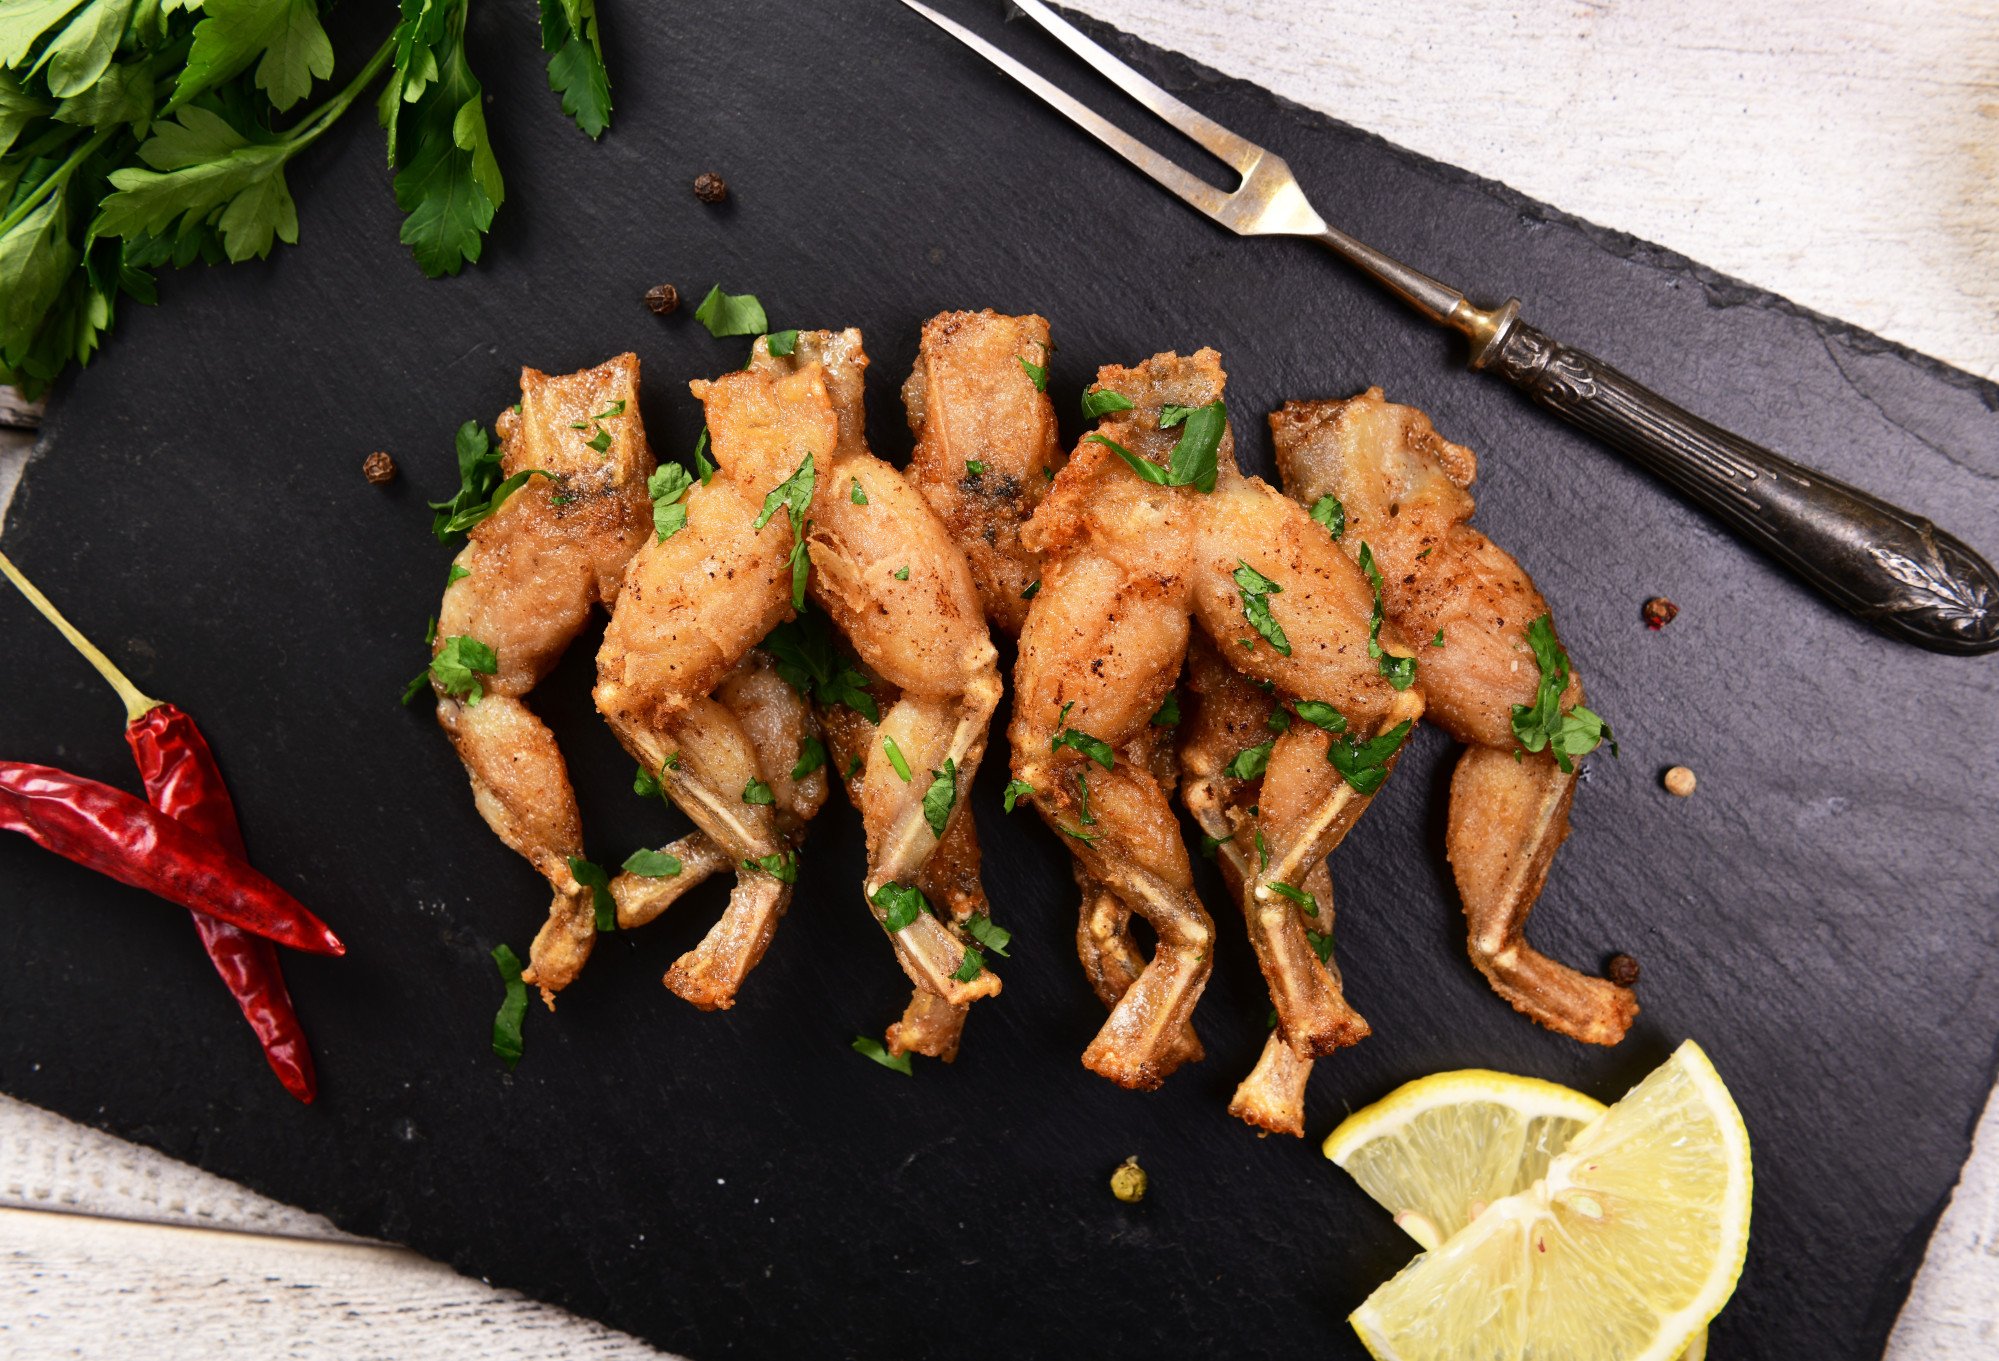 Western-style baked frogs’ legs. In France, edible frog species have been protected for decades. Photo: Shutterstock